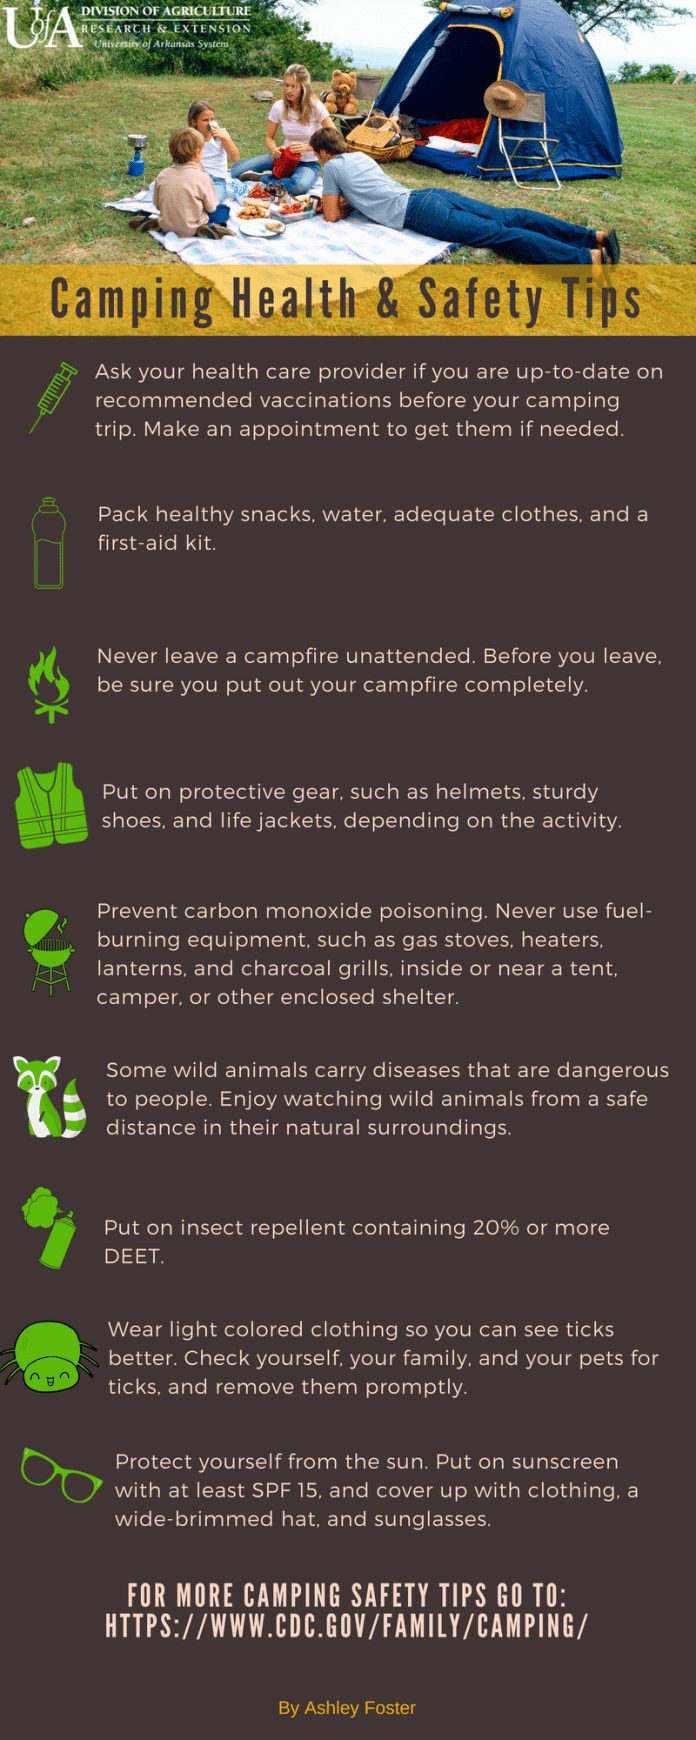 staying safe and avoiding common camping injuries